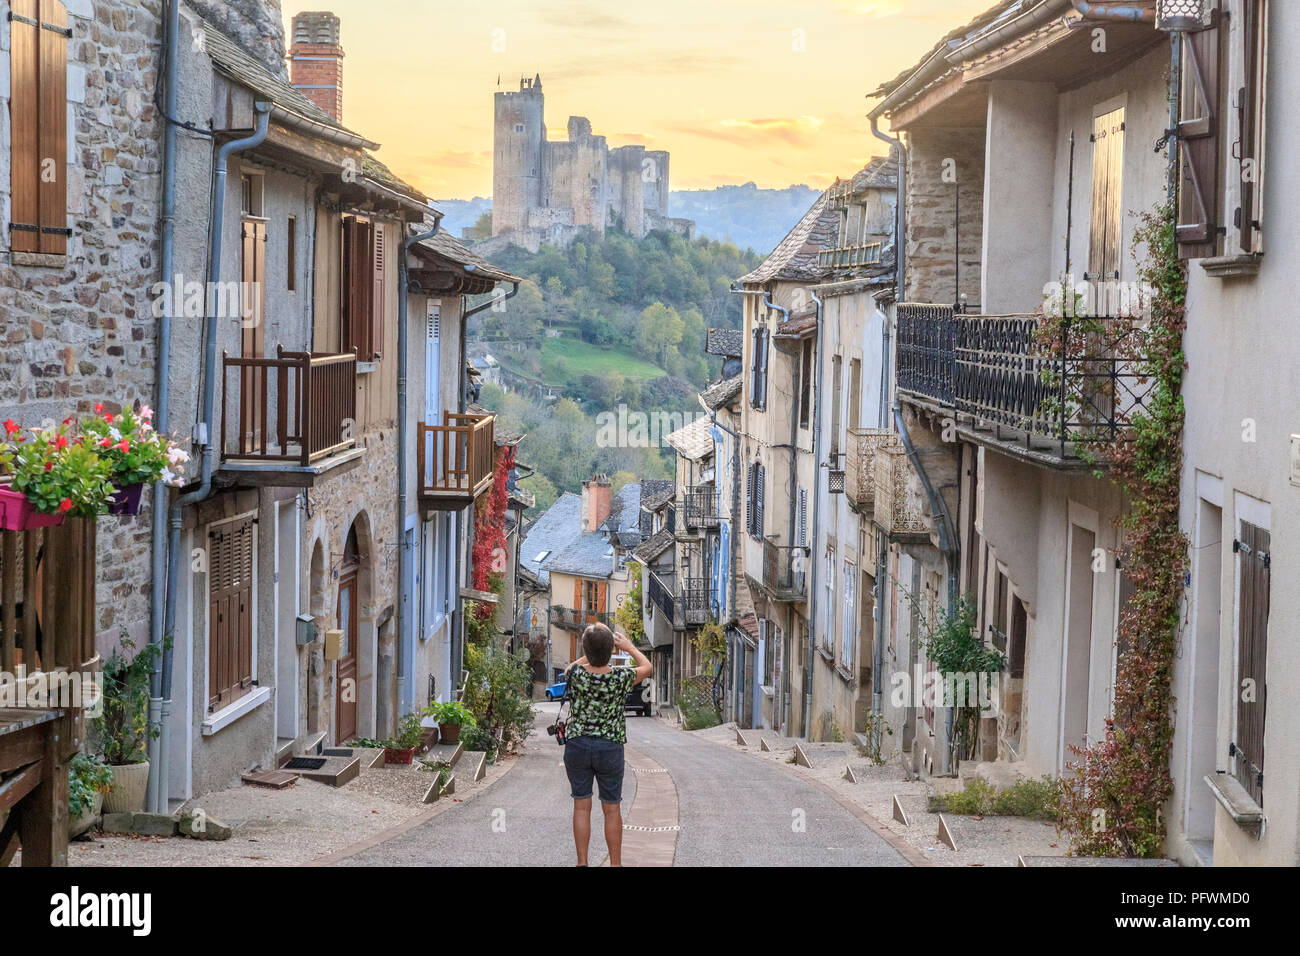 France, Aveyron, Najac, labelled Les Plus Beaux Villages de France (The Most Beautiful Villages of France), street in medieval village and Najac castl Stock Photo